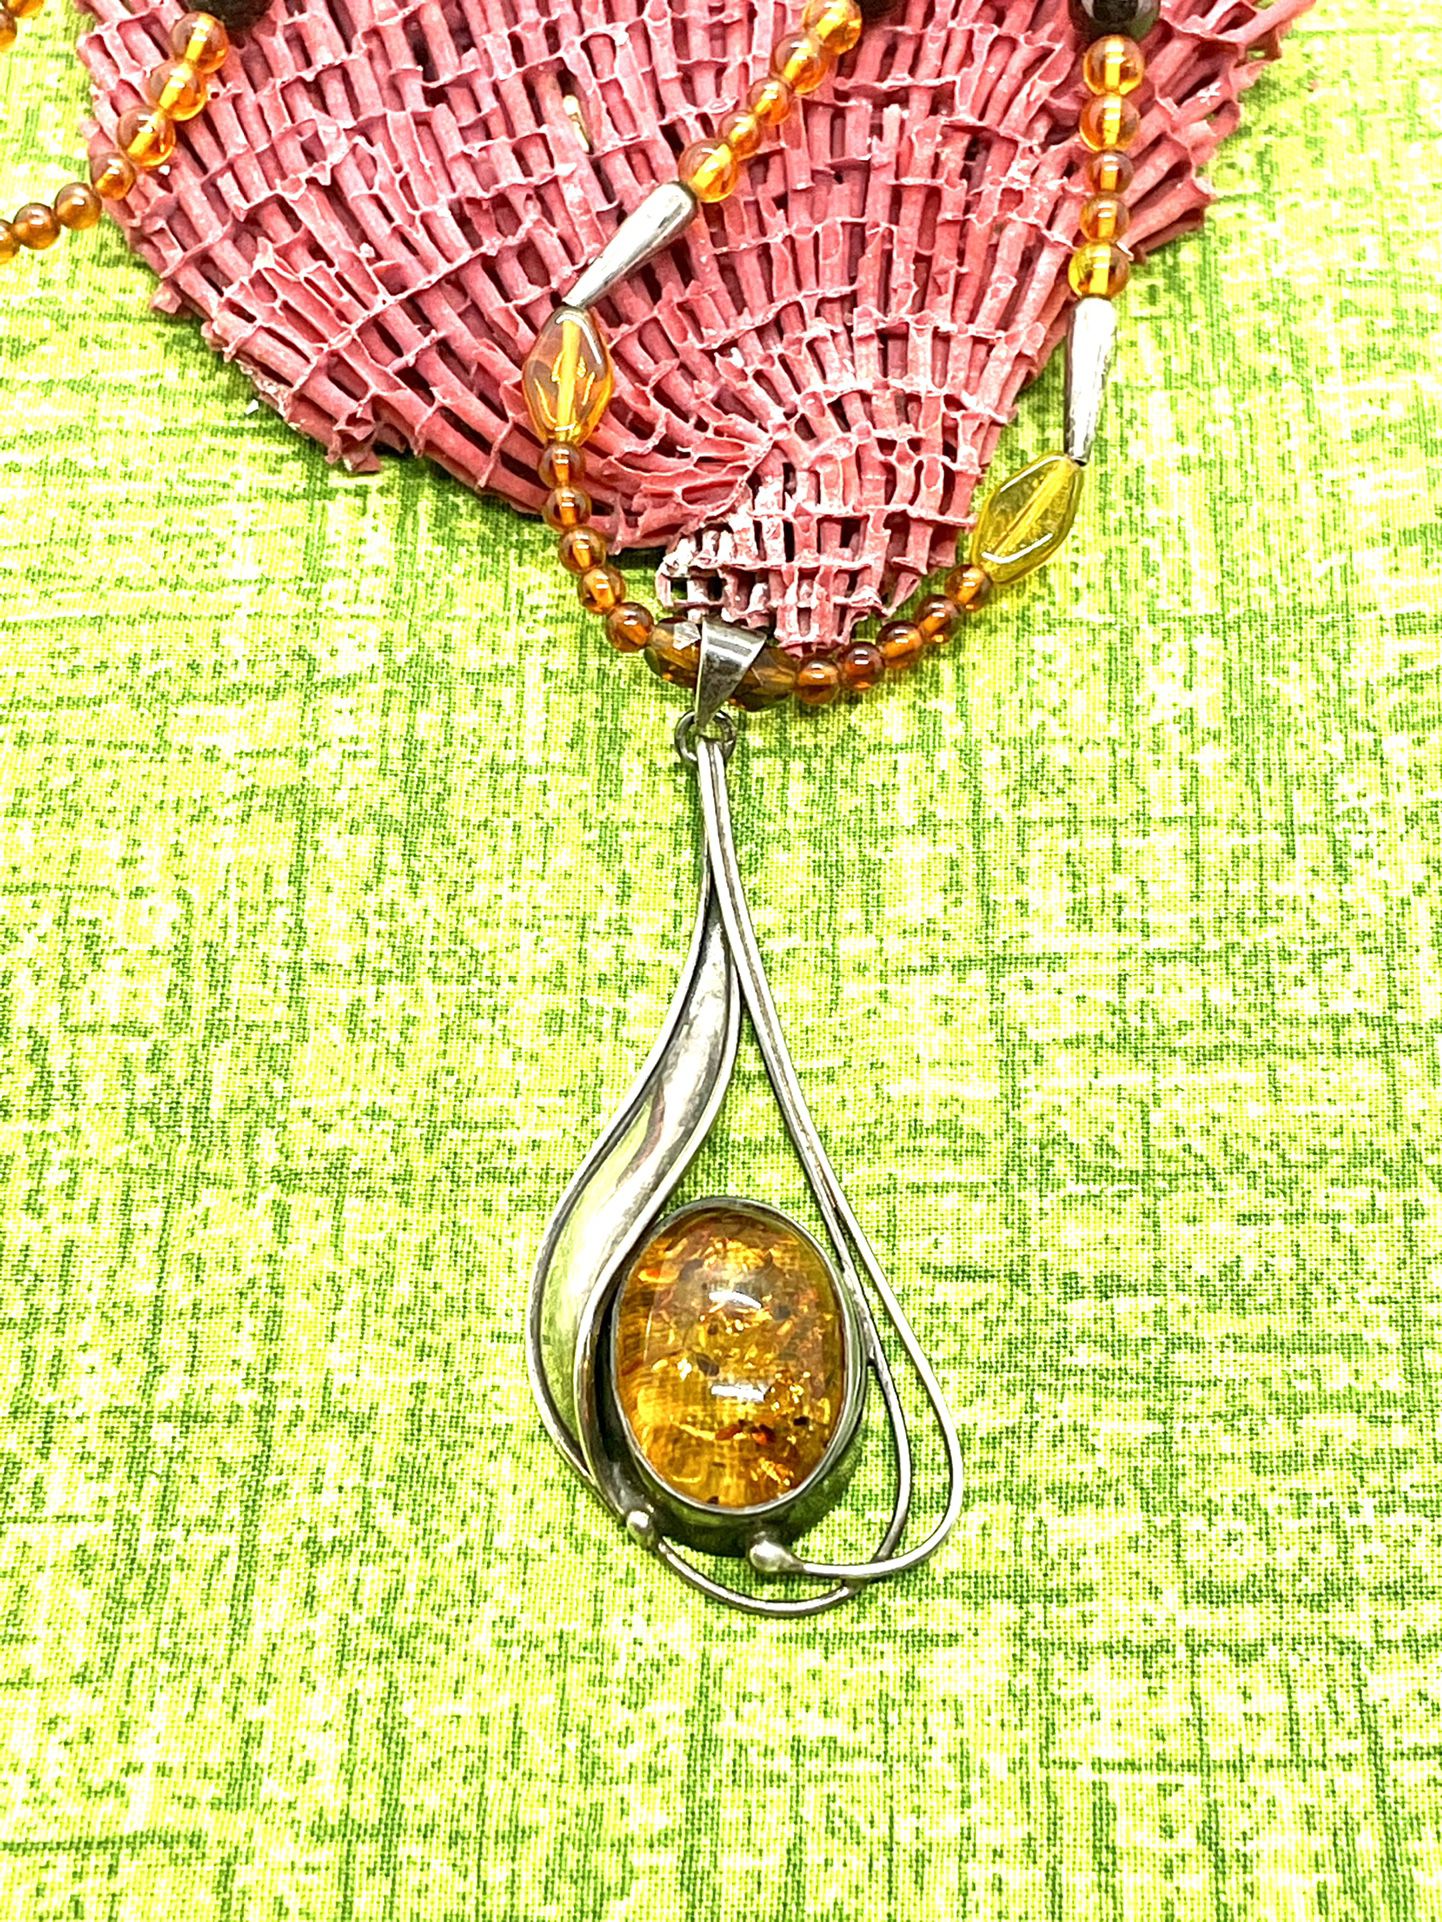 Silver Amber Necklace